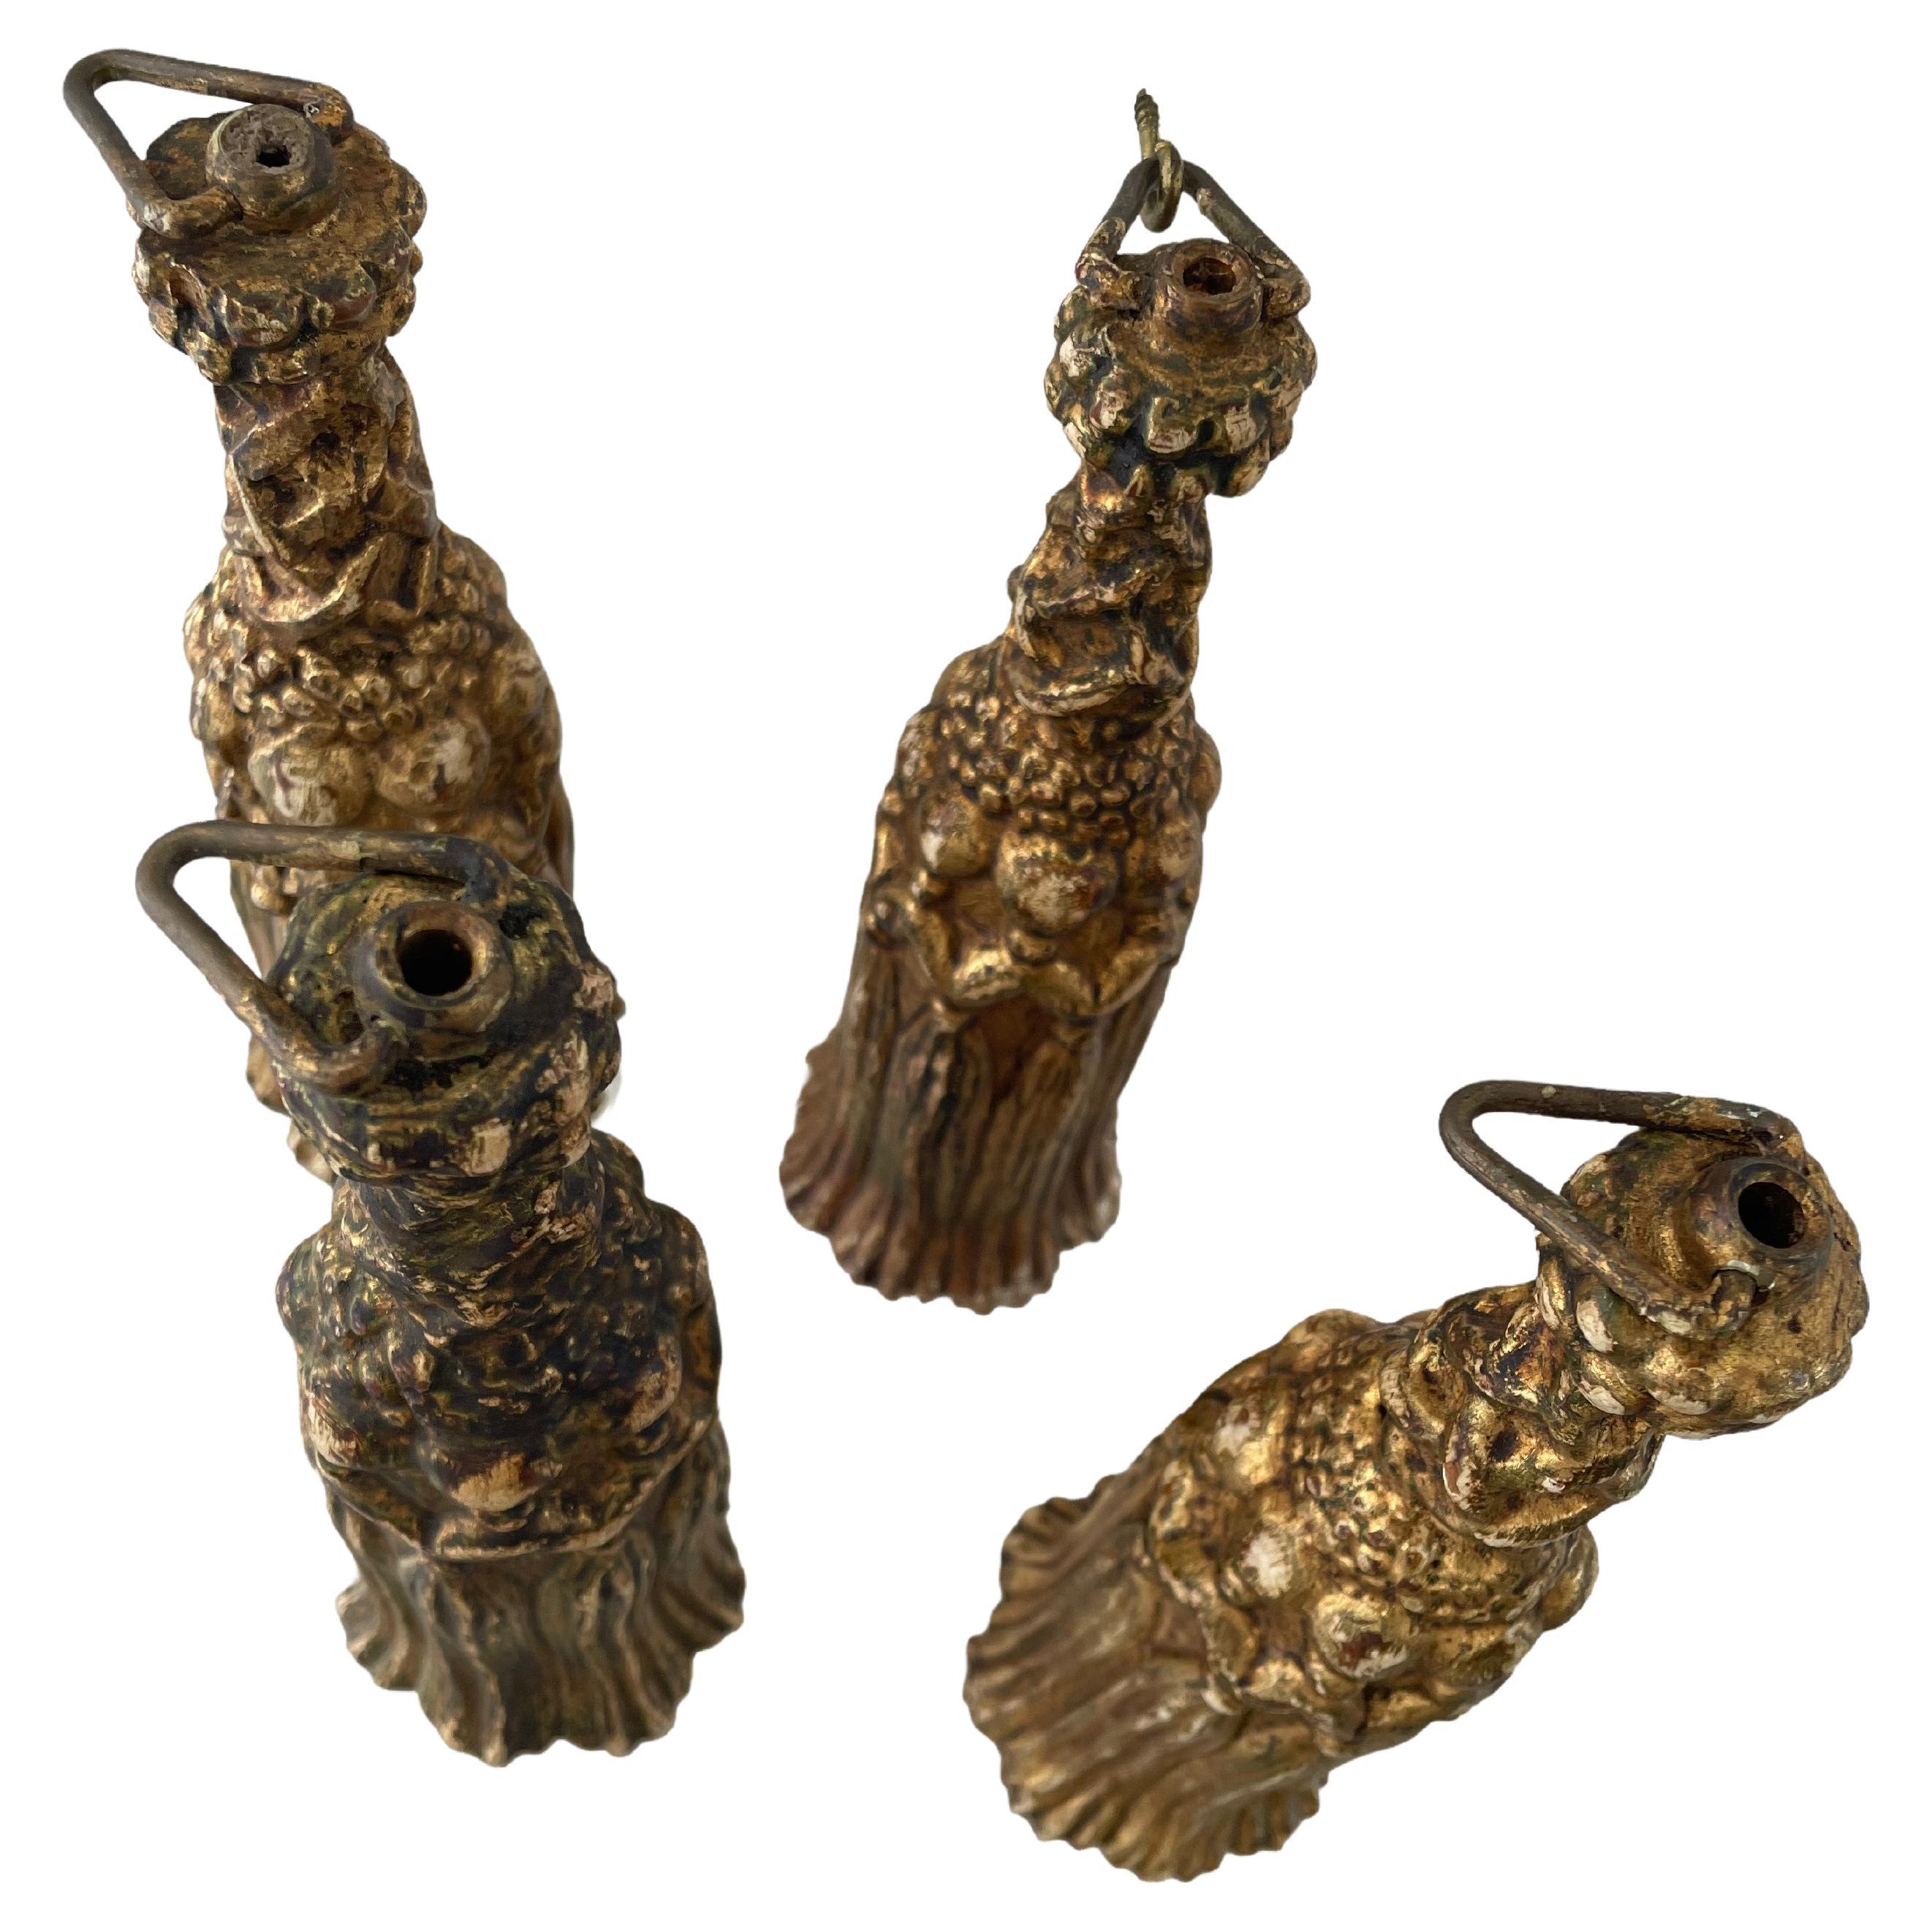 The meticulous craftsmanship of these hand carved gilded wood drapery tassels is superb. From the forged metal pulls on top to the intricately carved body, these gilt tassels are visually stunning and functional. They are – as they were in the past